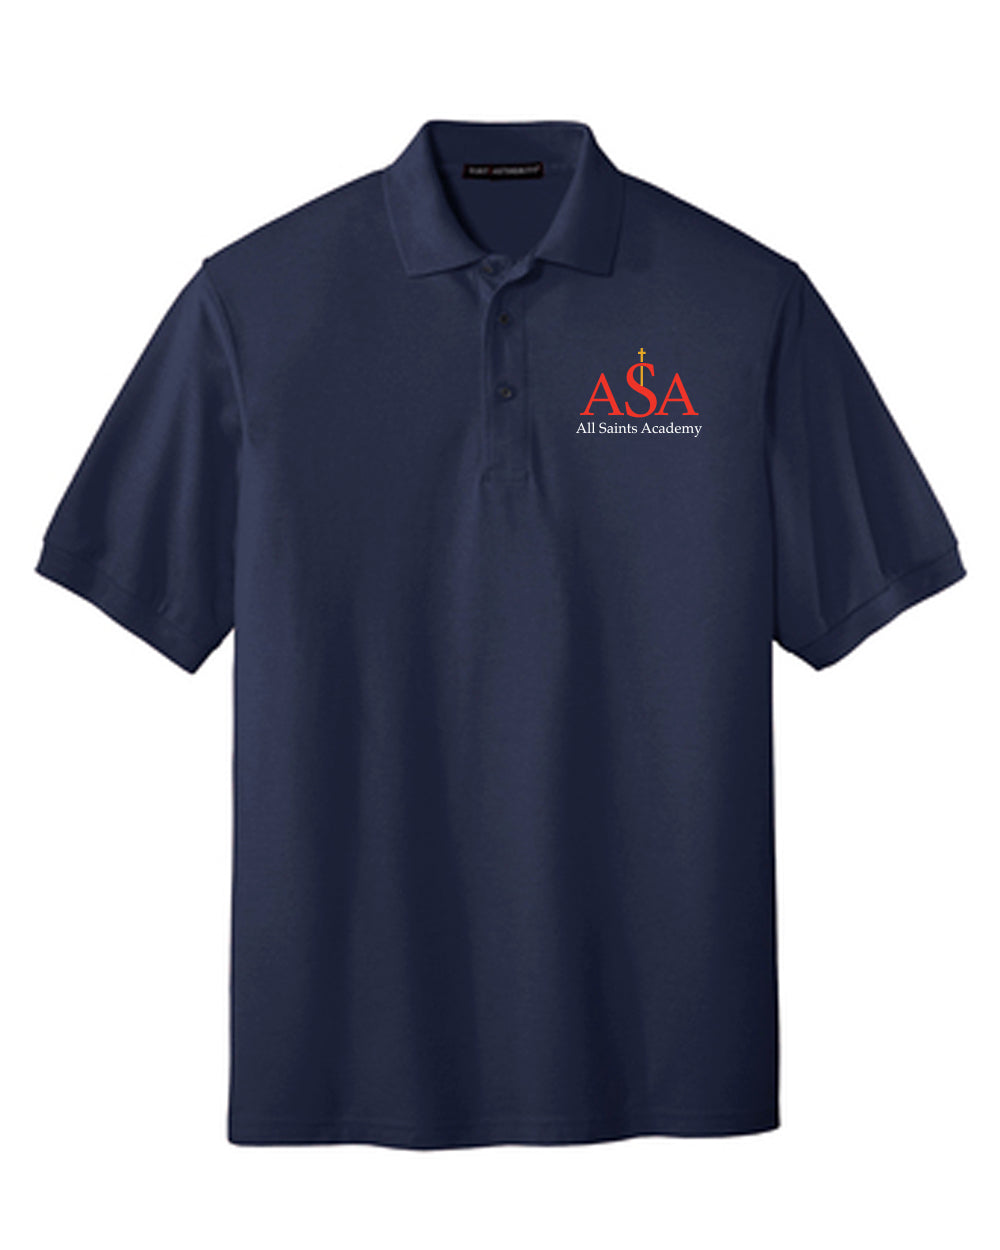 All Saints Academy YOUTH Port Authority Silk Touch™ Polo